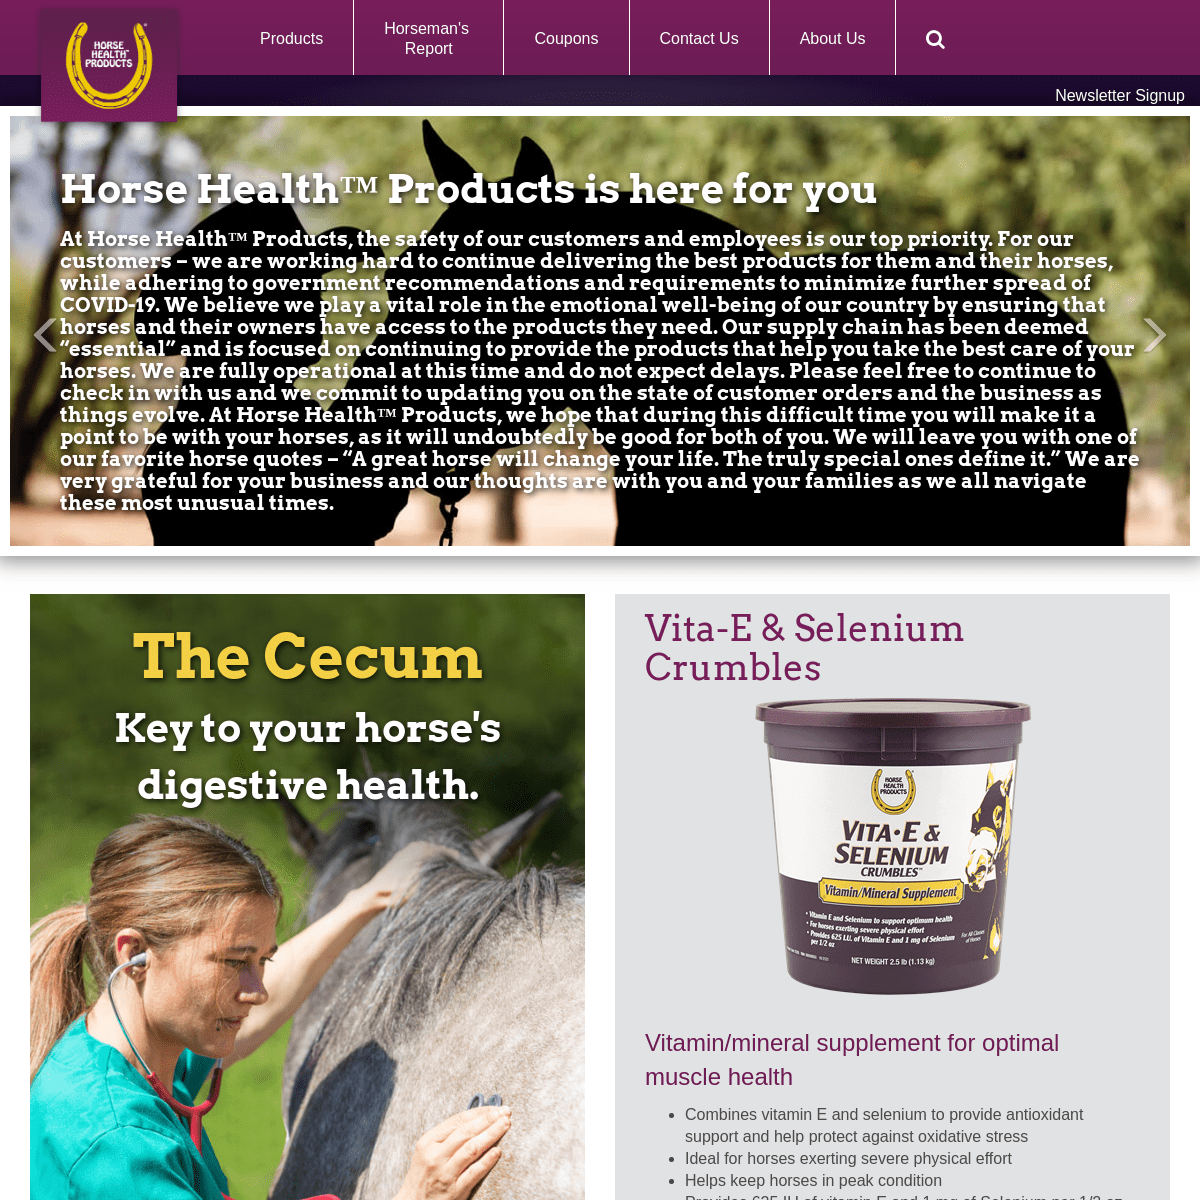 A complete backup of horsehealthproducts.com